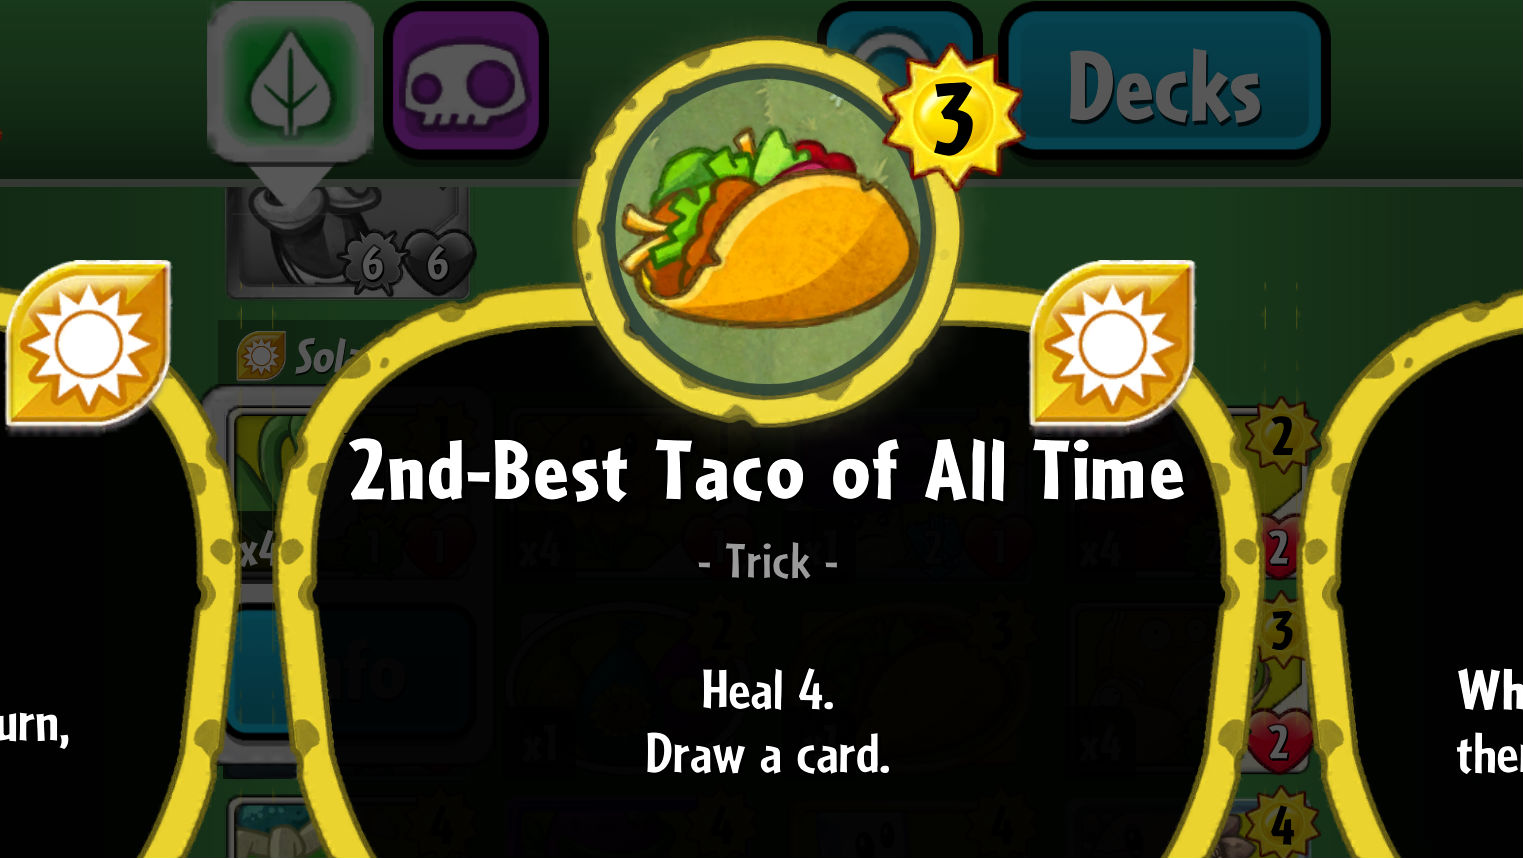 Plants vs. Zombies Heroes 2nd-Best Taco of All Time